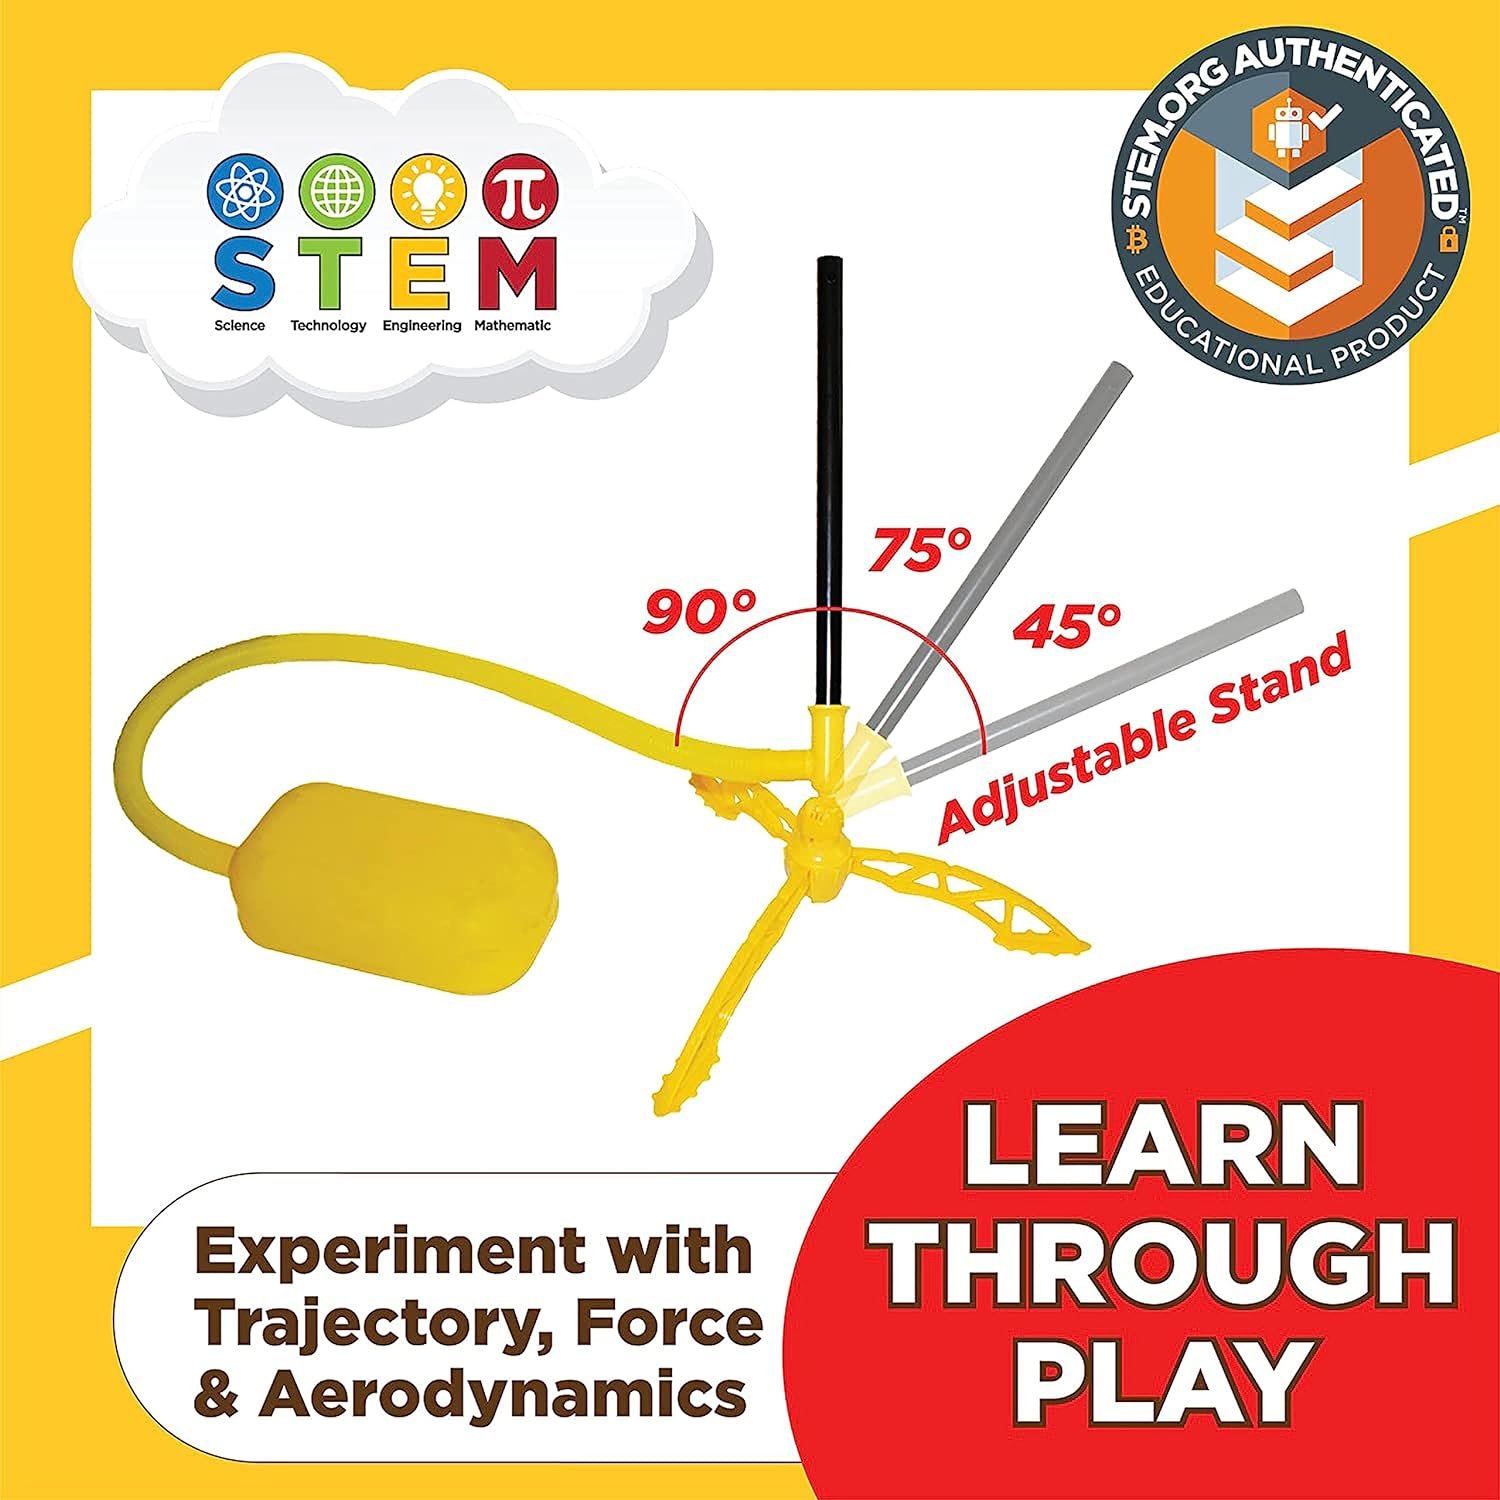 Stomp Rocket Original Jr. Rockets Launcher for Kids - Soars 100 Ft - 8 Multi Color Foam Rockets and 1 Adjustable Launcher Stand - Fun Outdoor or Indoor Toy and Gift for Boys or Girls Age 3+ Years Old : Toys  Games